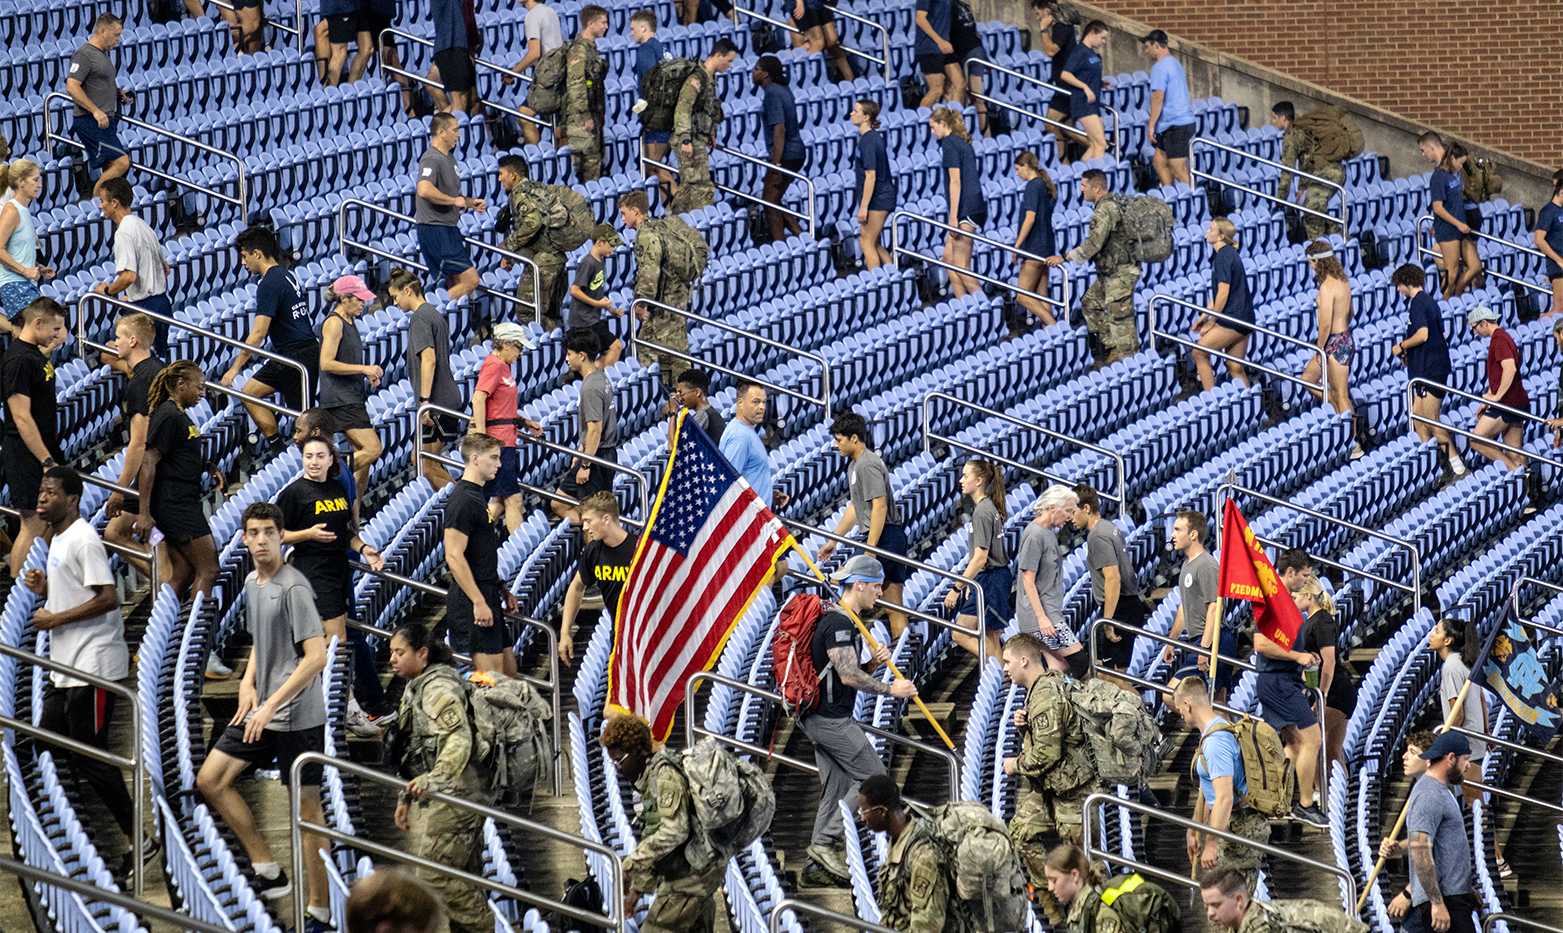 A large group of people, some dressed in military fatigues and some holding flags, running and walking up and down stadium stairs.